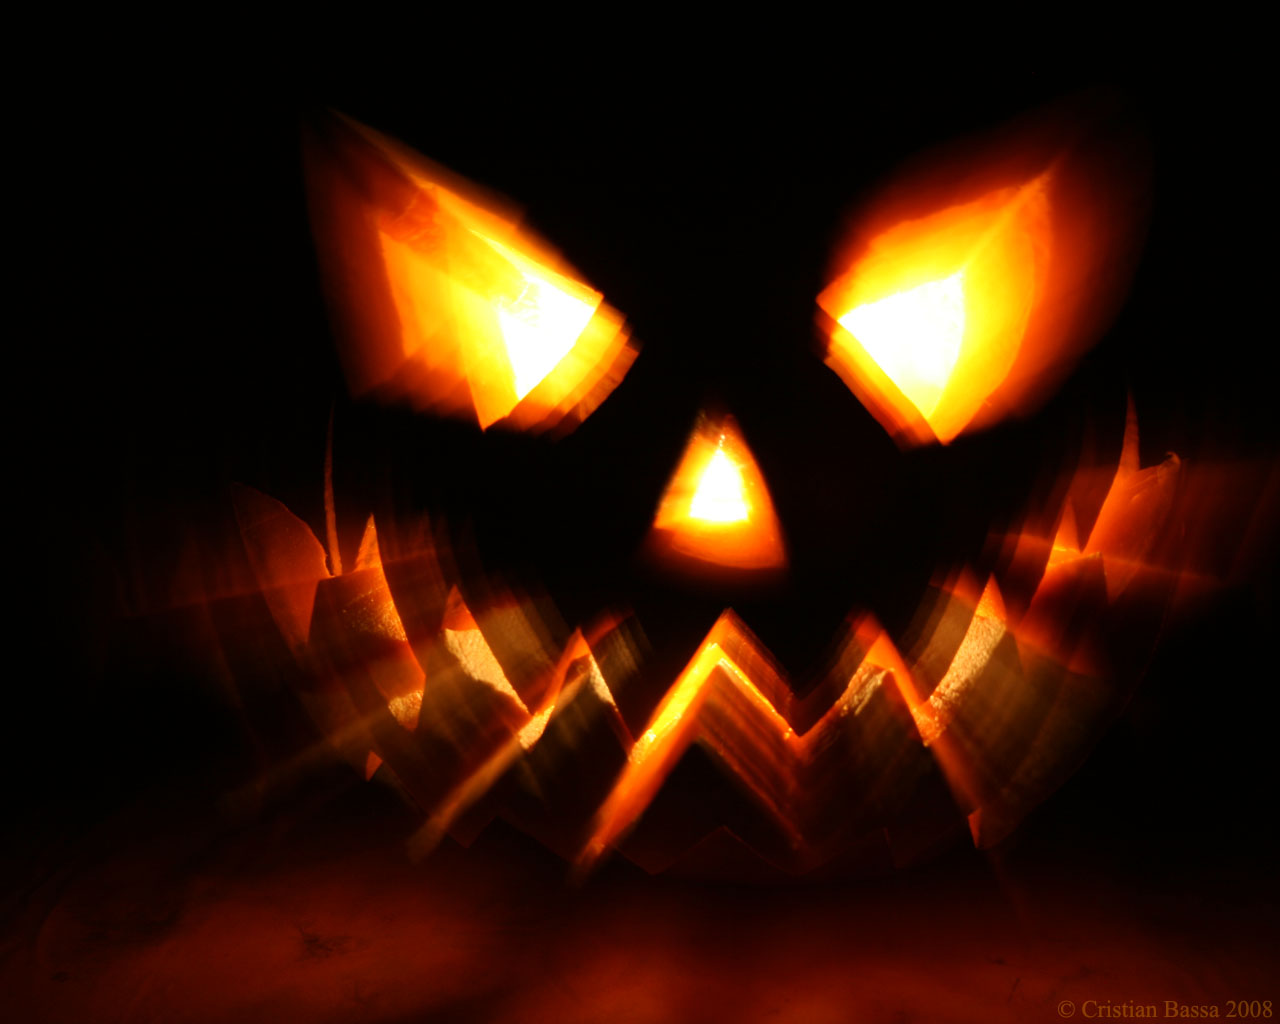 Gallery For Gt Scary Happy Halloween Background